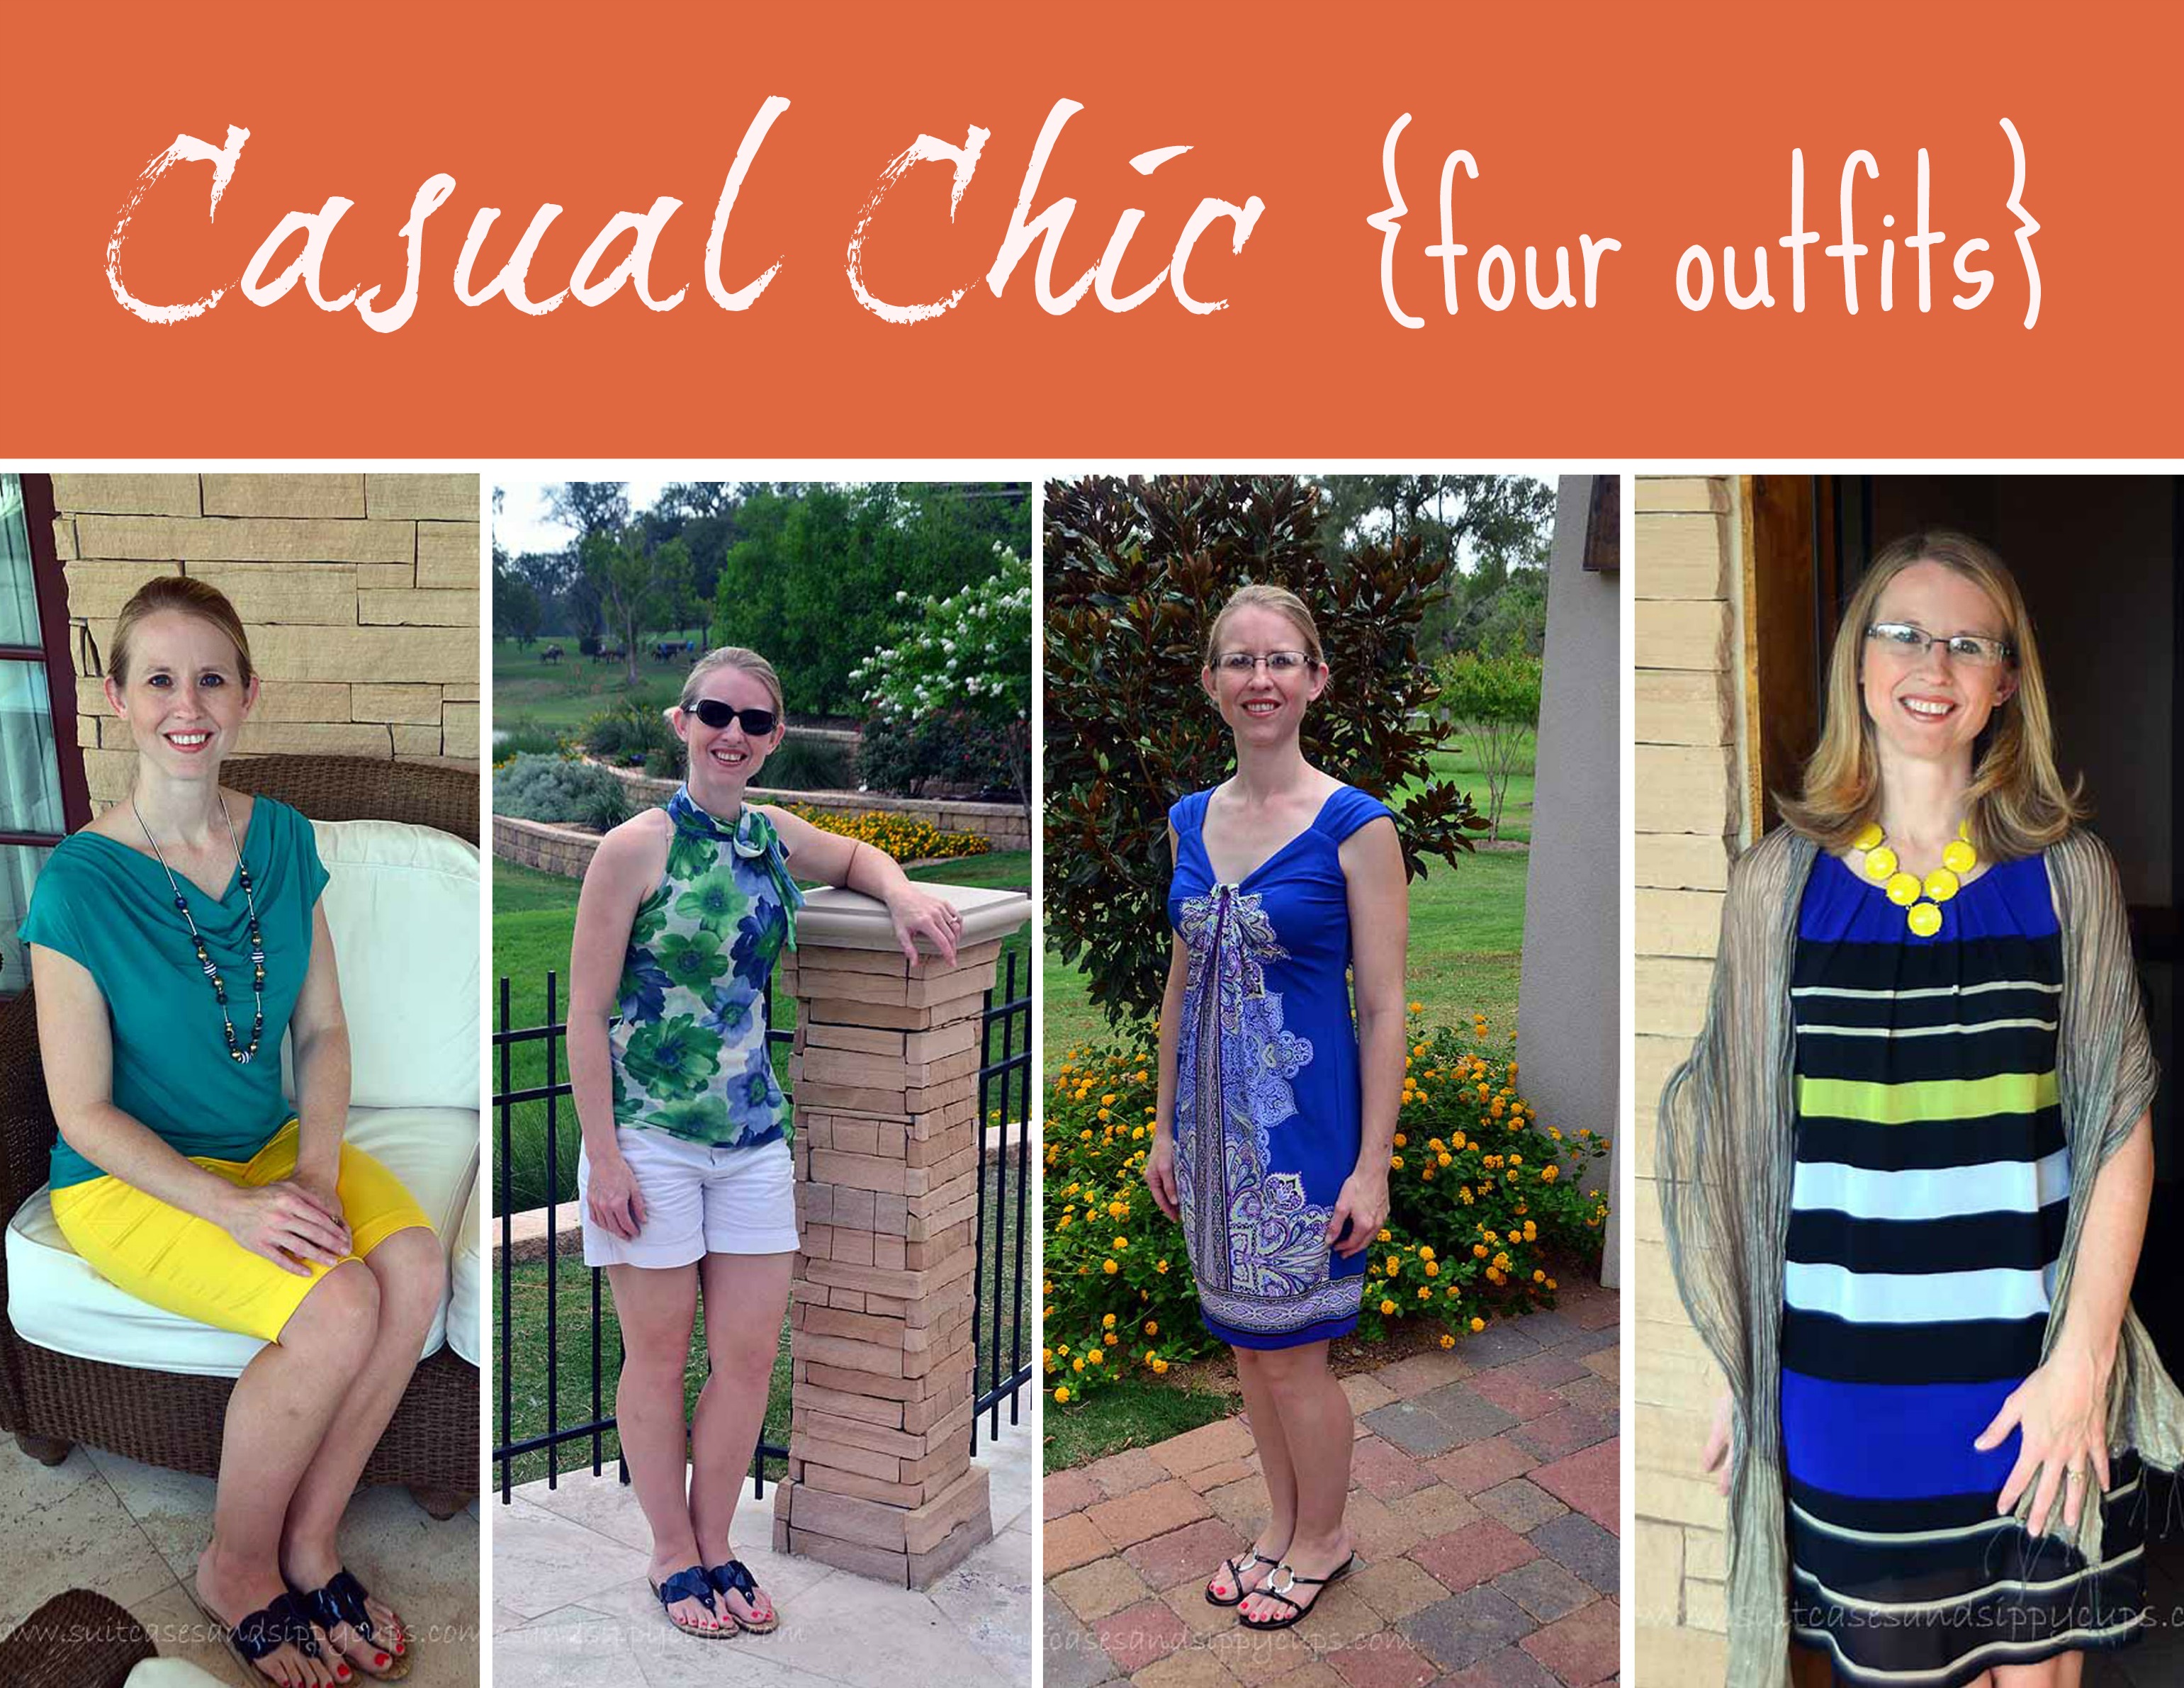 Deciphering Dress Code: What is Casual Chic?~Packing for a Upscale Ranch Weekend